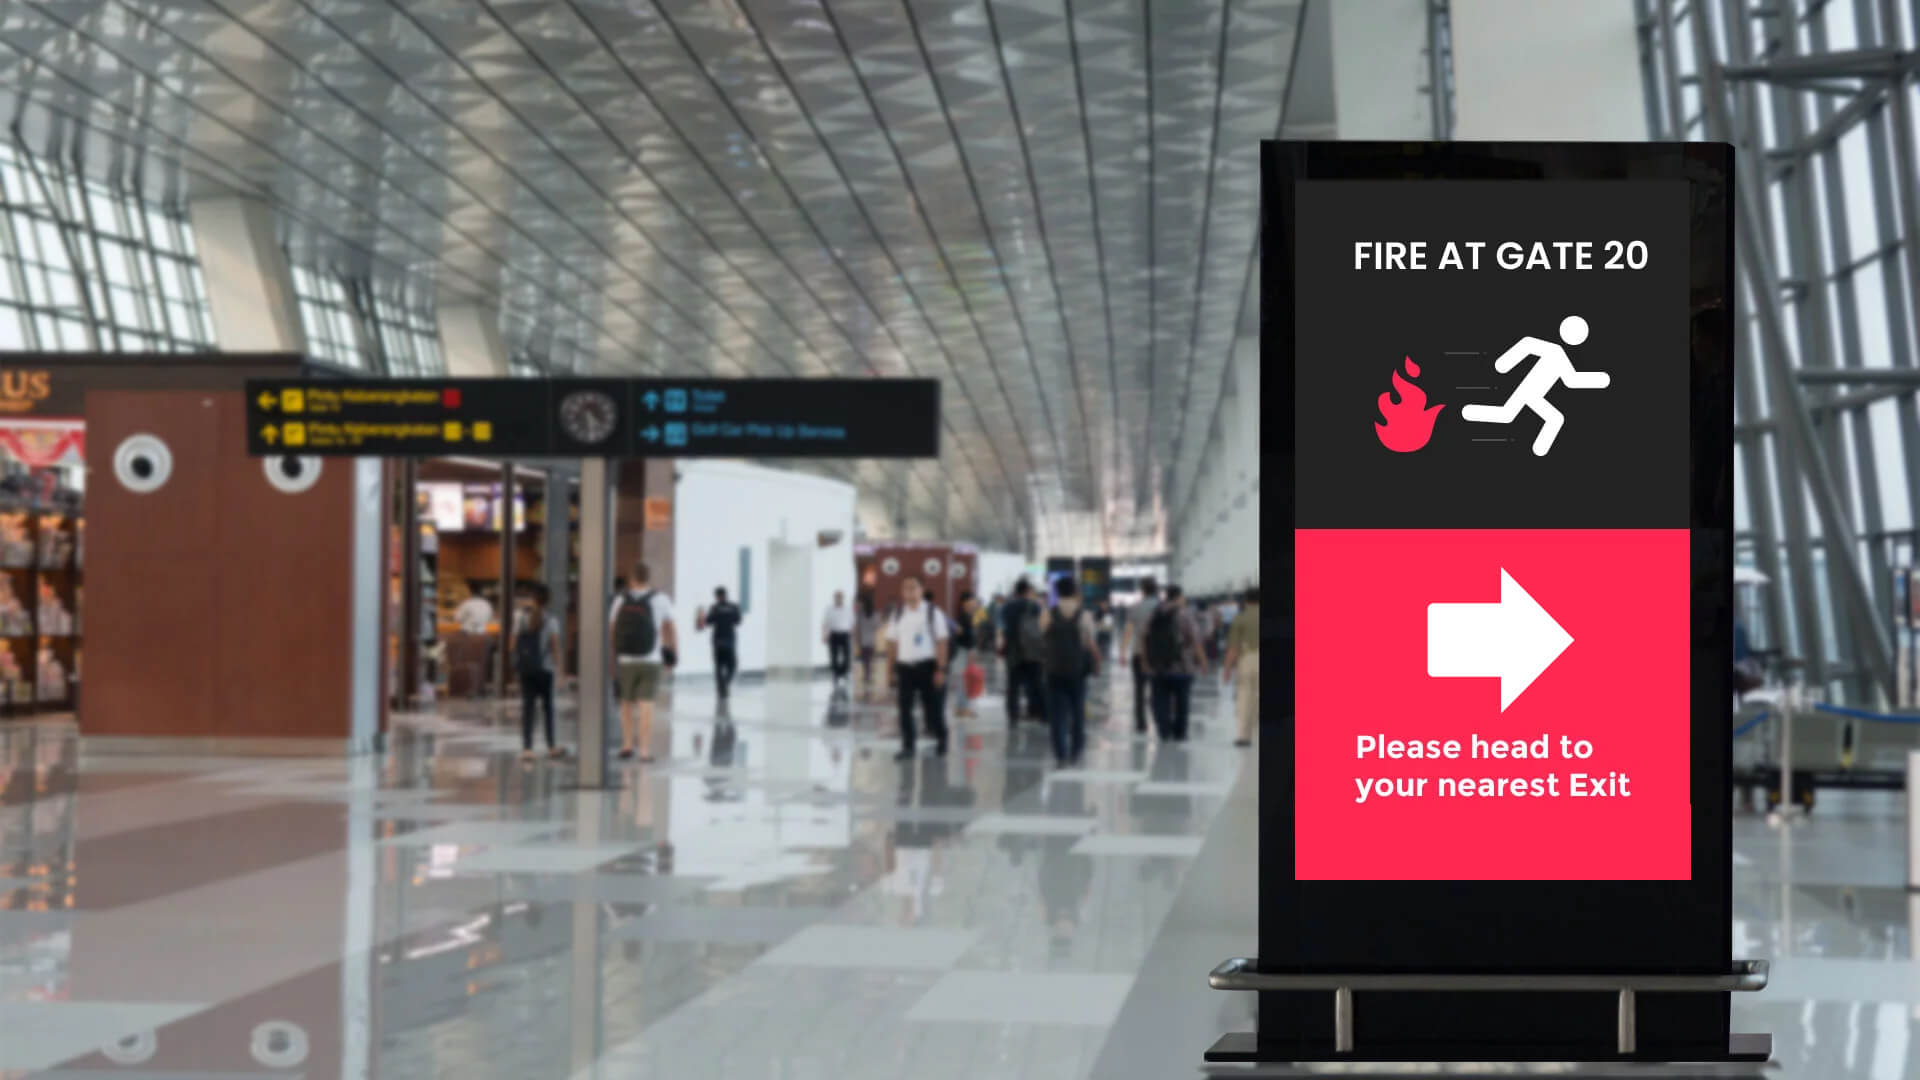   AI-enabled digital signage to improve security and safety through real-time alerts.